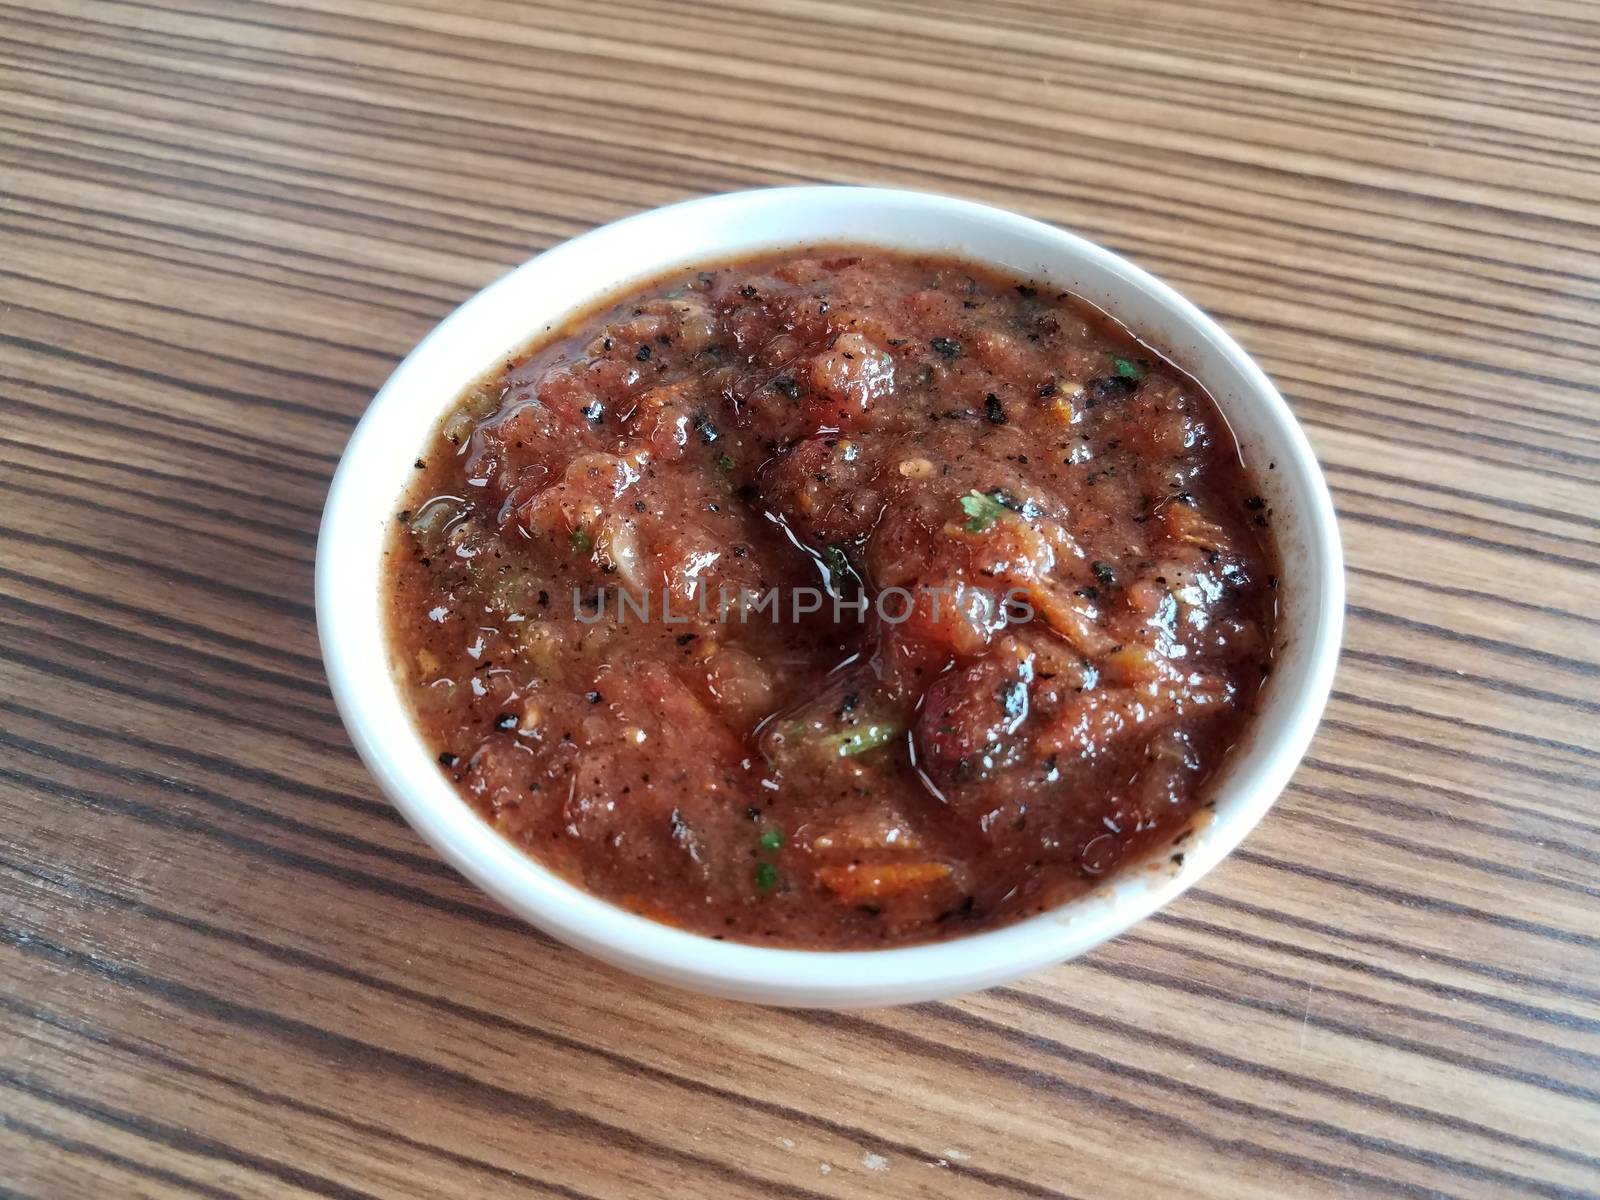 spicy salsa with tomato and pepper and other seasoning on brown wood table